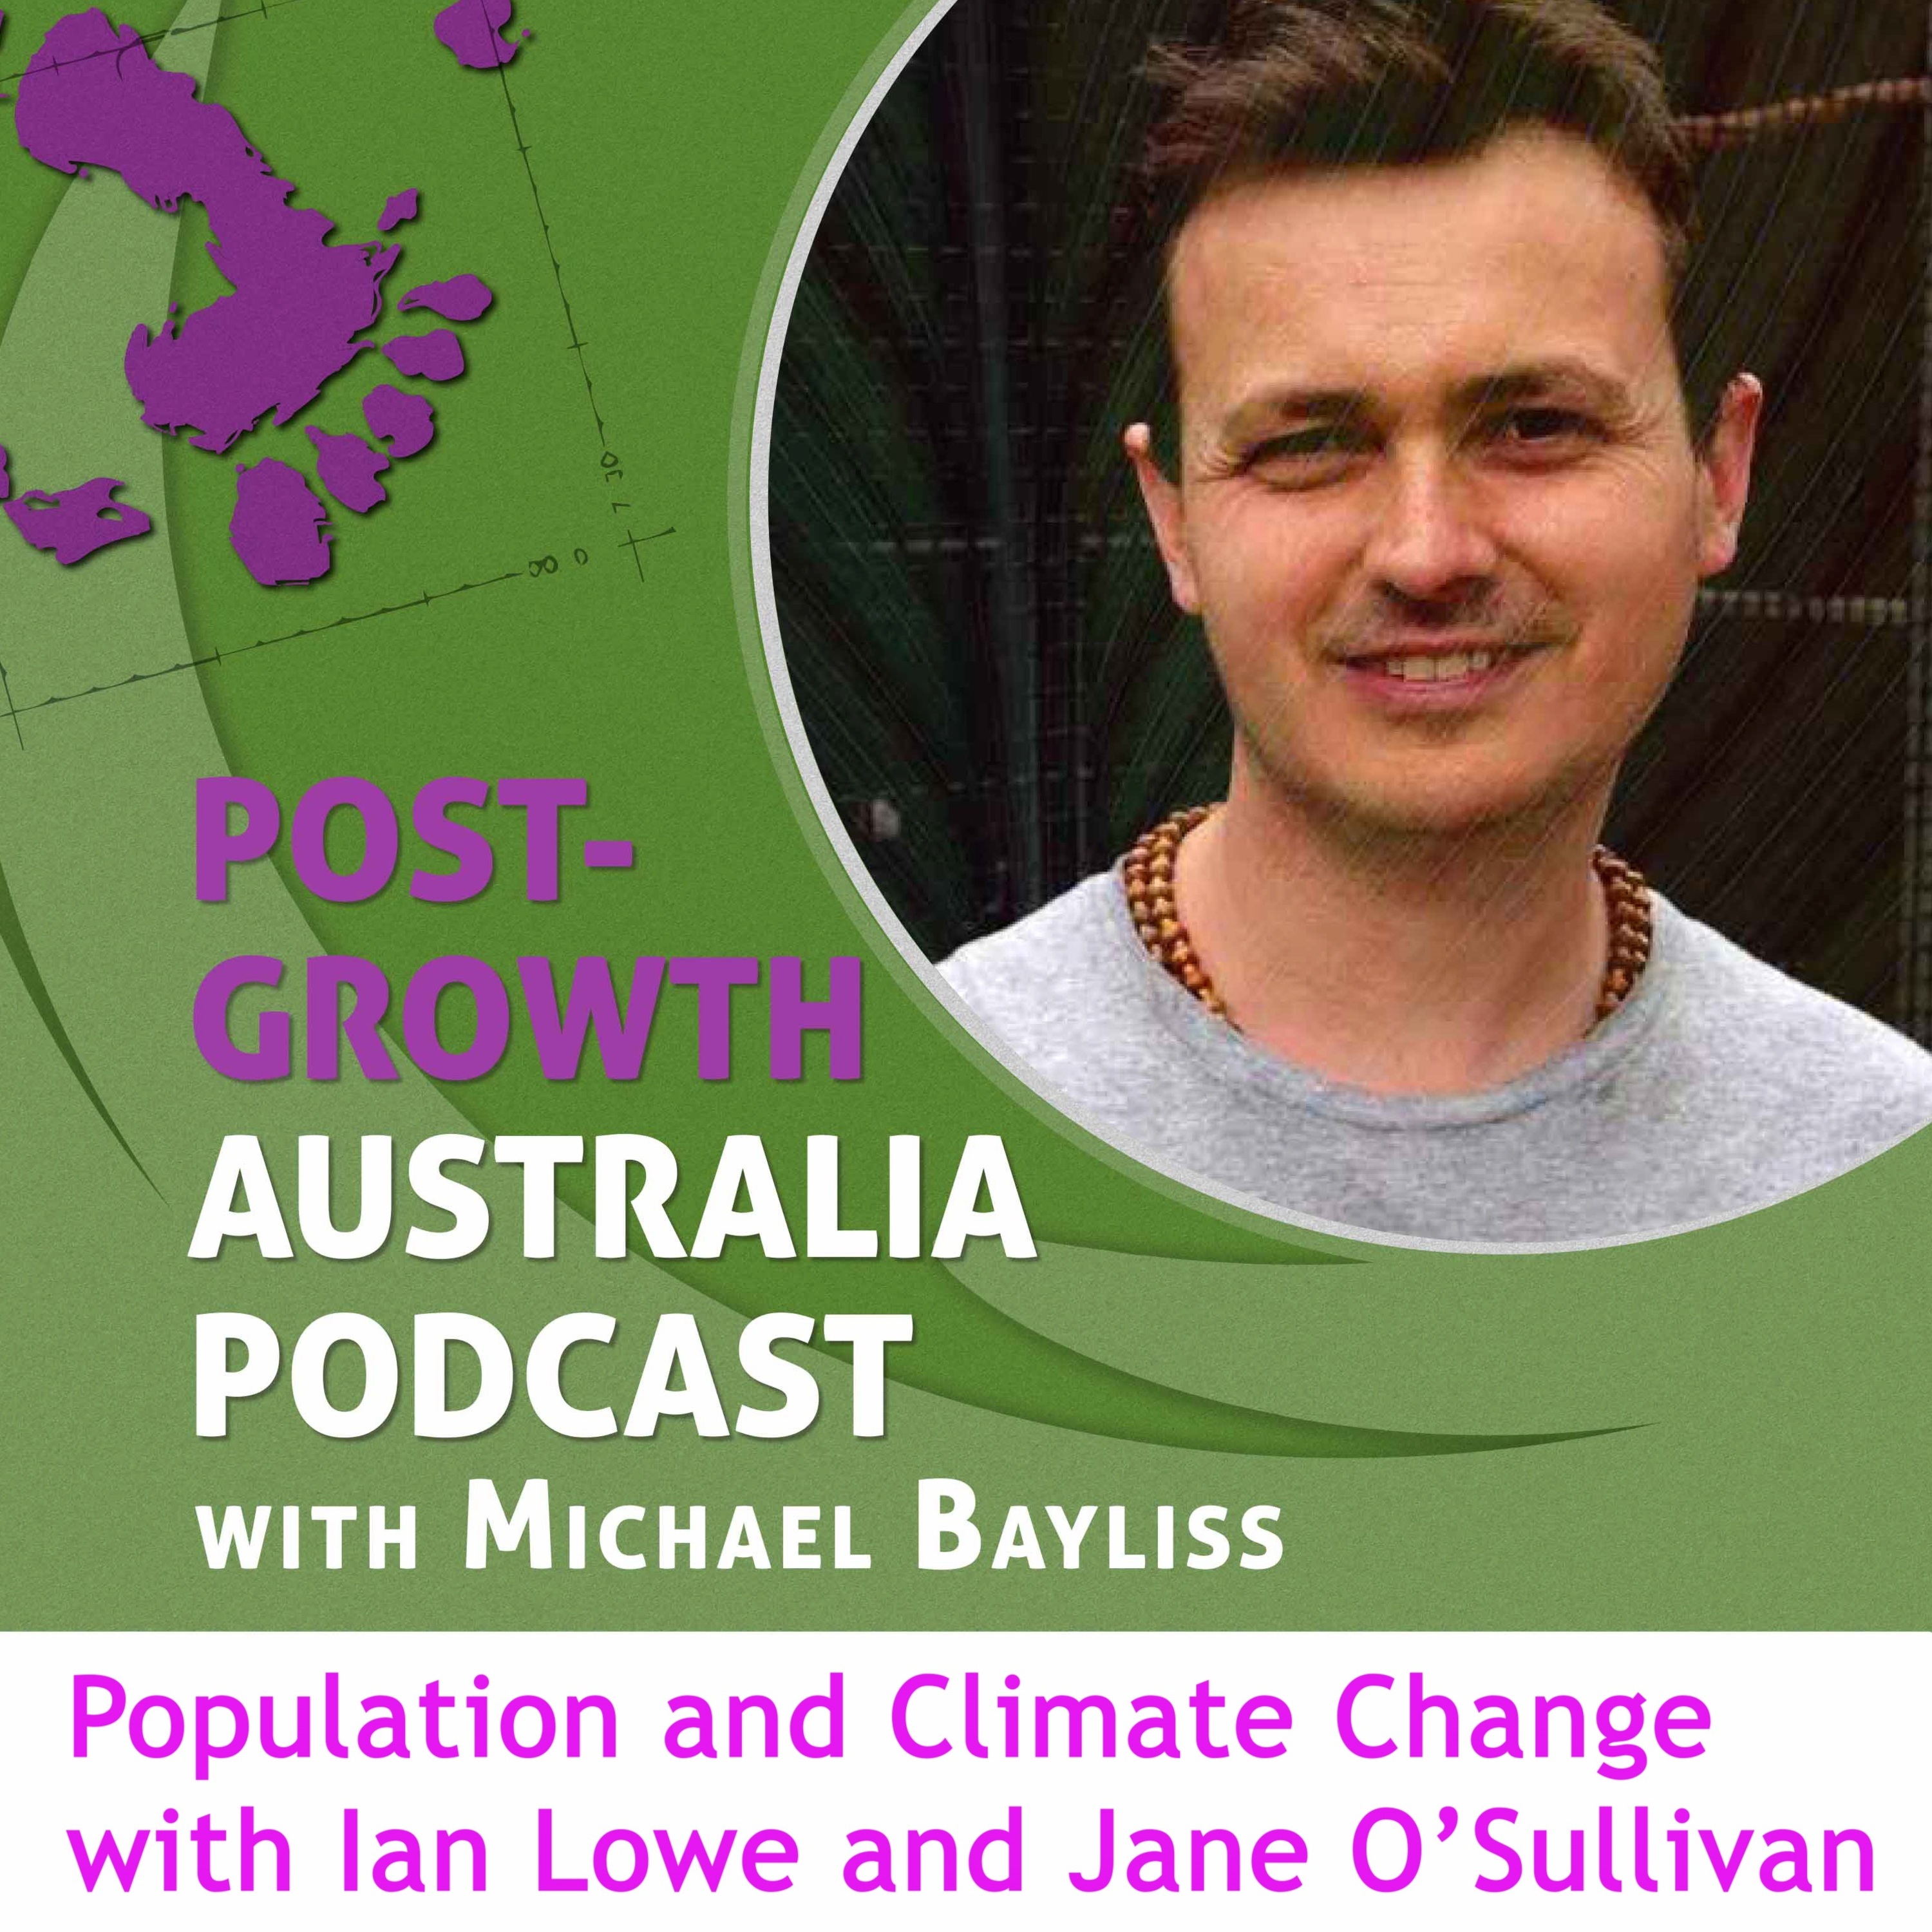 Population and Climate Change with Ian Lowe and Jane O’Sullivan